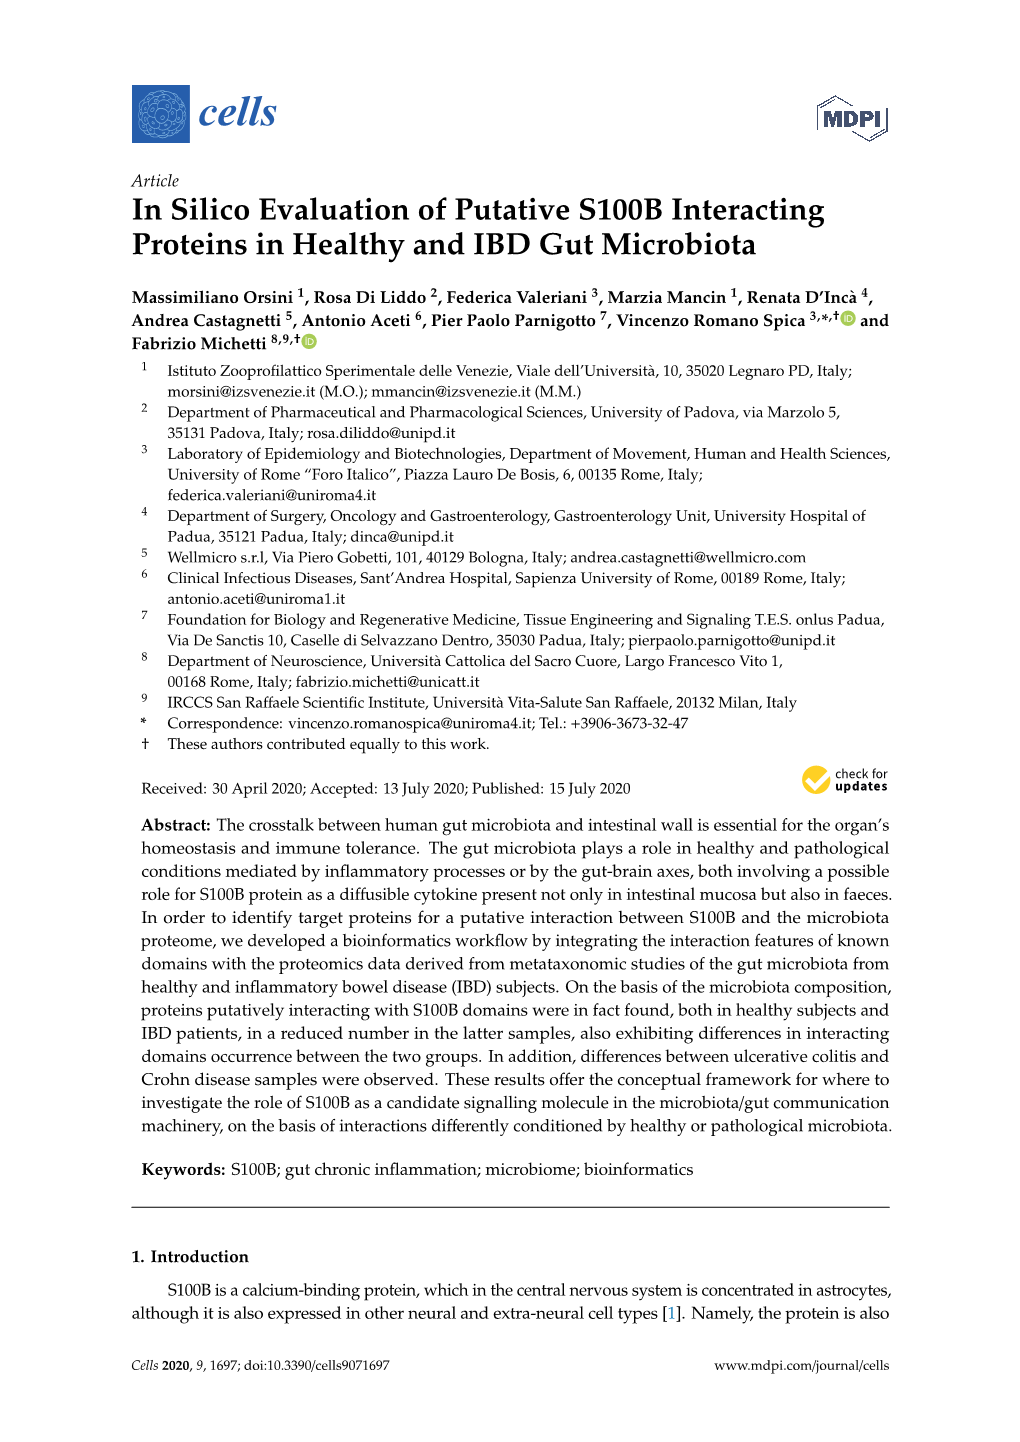 In Silico Evaluation of Putative S100B Interacting Proteins in Healthy and IBD Gut Microbiota